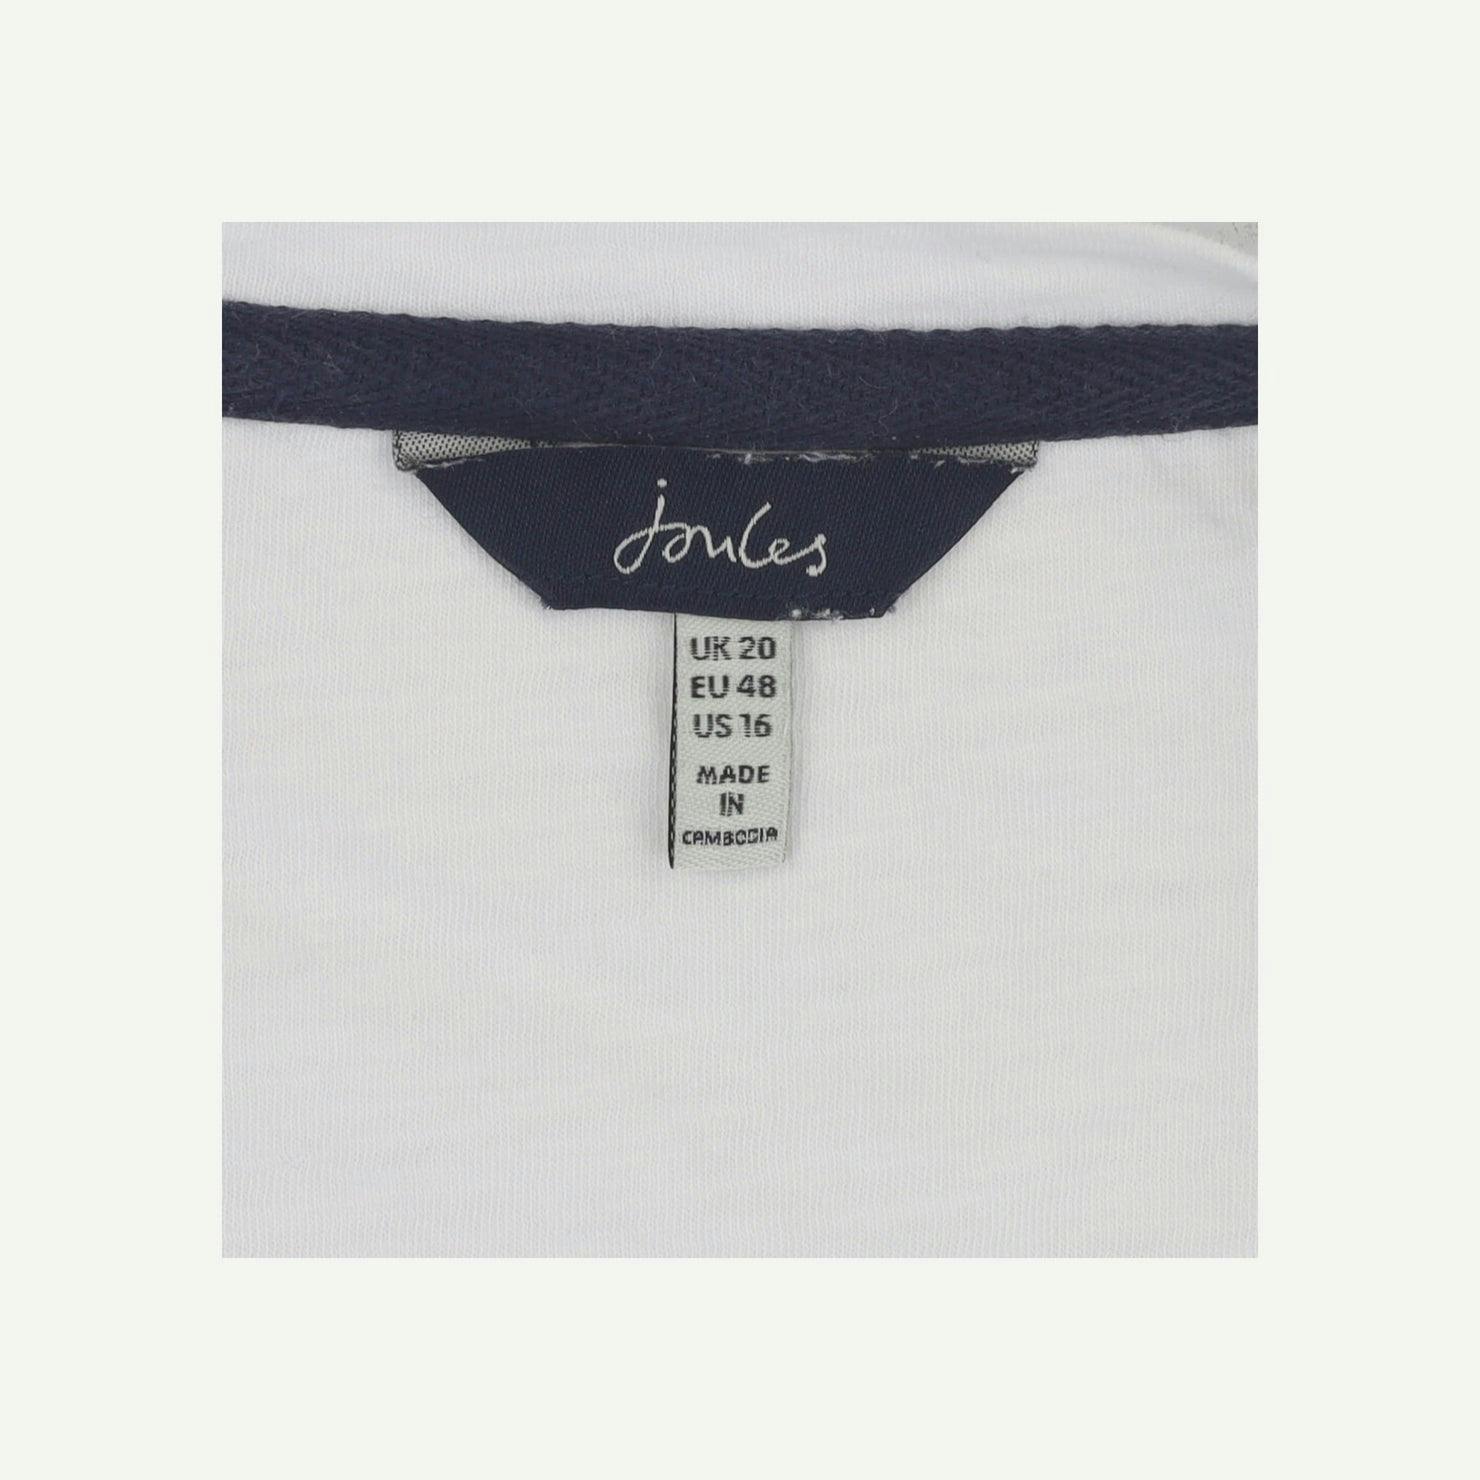 Joules Pre-loved White Top